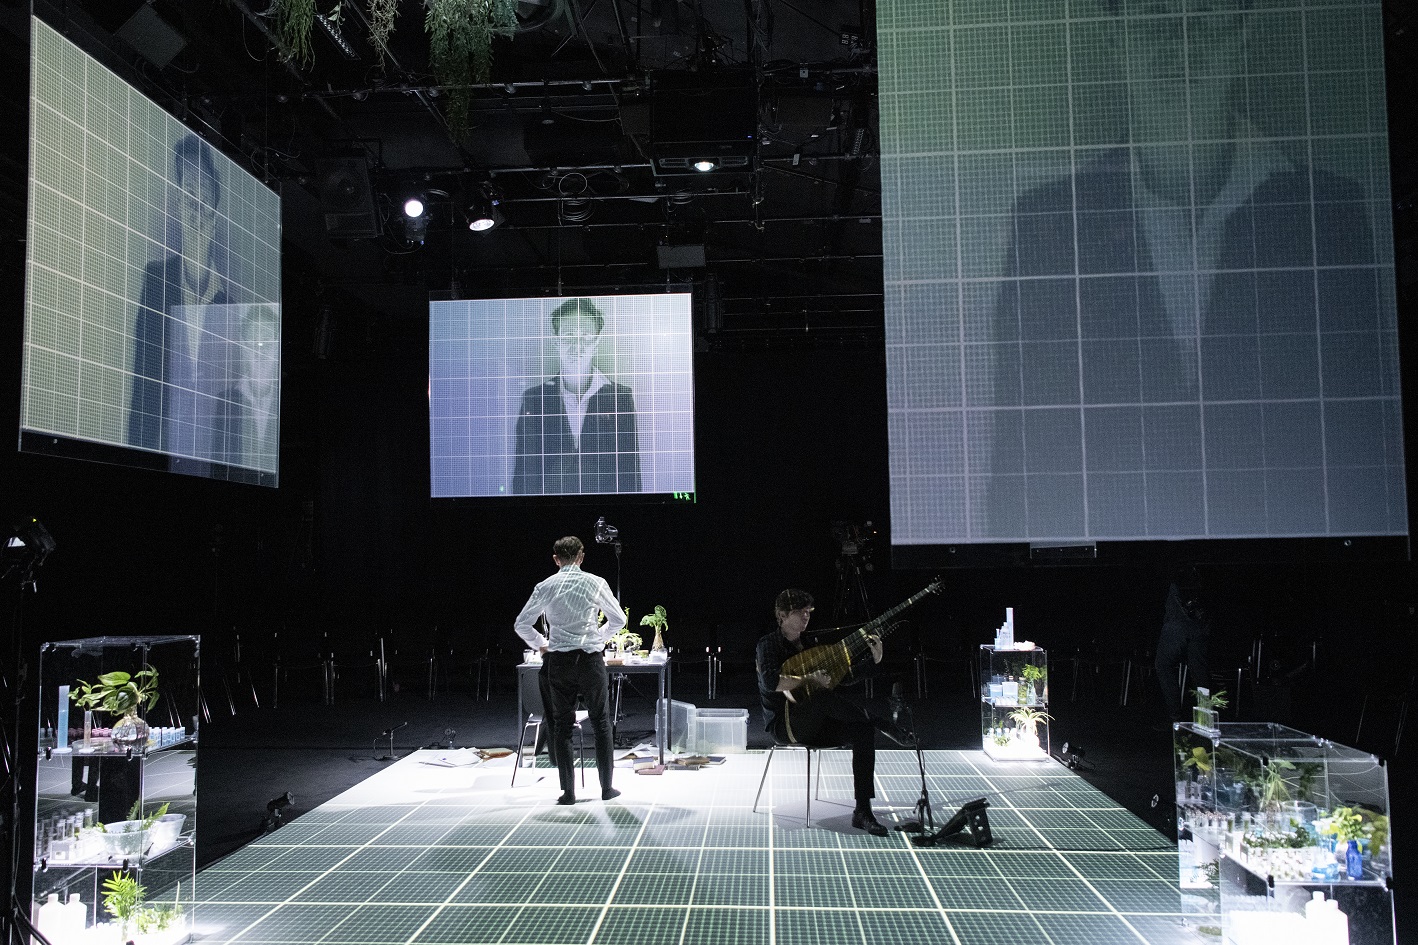 An Anatomy of Melancholy at the Barbican's Pit Theatre 27 - 30 Oct . countertenor Iestyn Davies, Thomas Dunford lute. Direction, design and video design Netia Jones